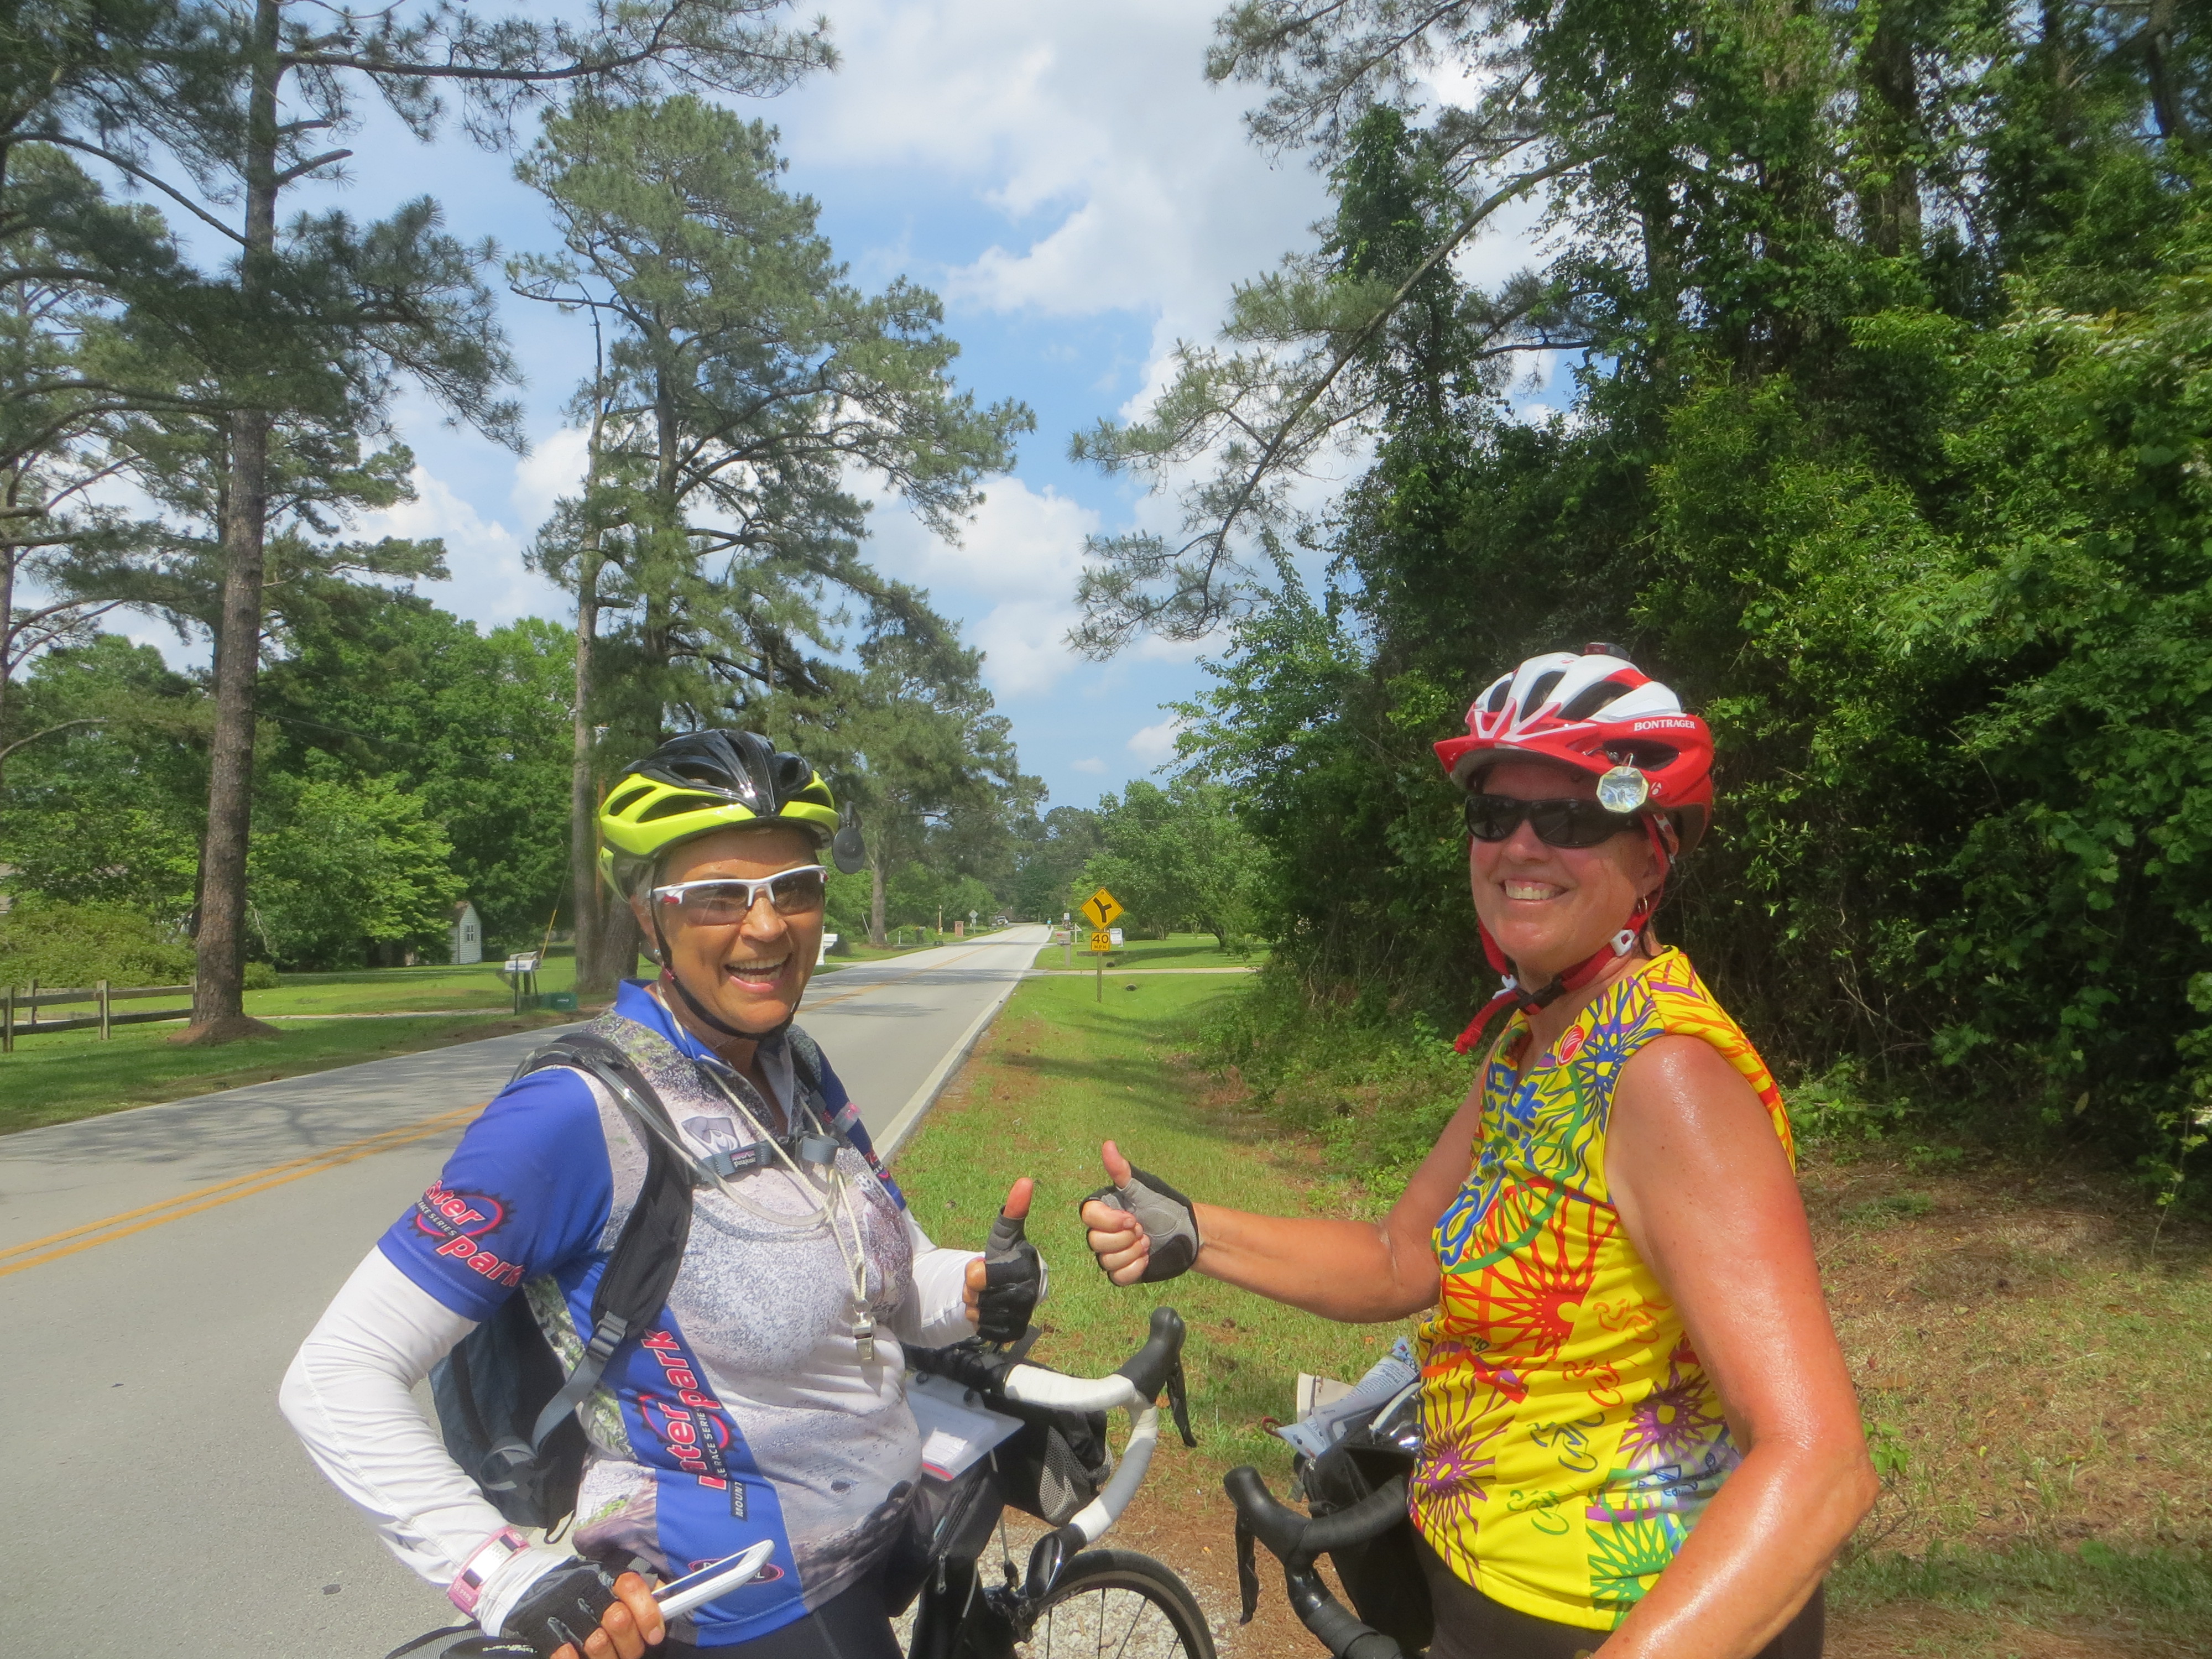 Gail and I pedaled together all day - a great partner!